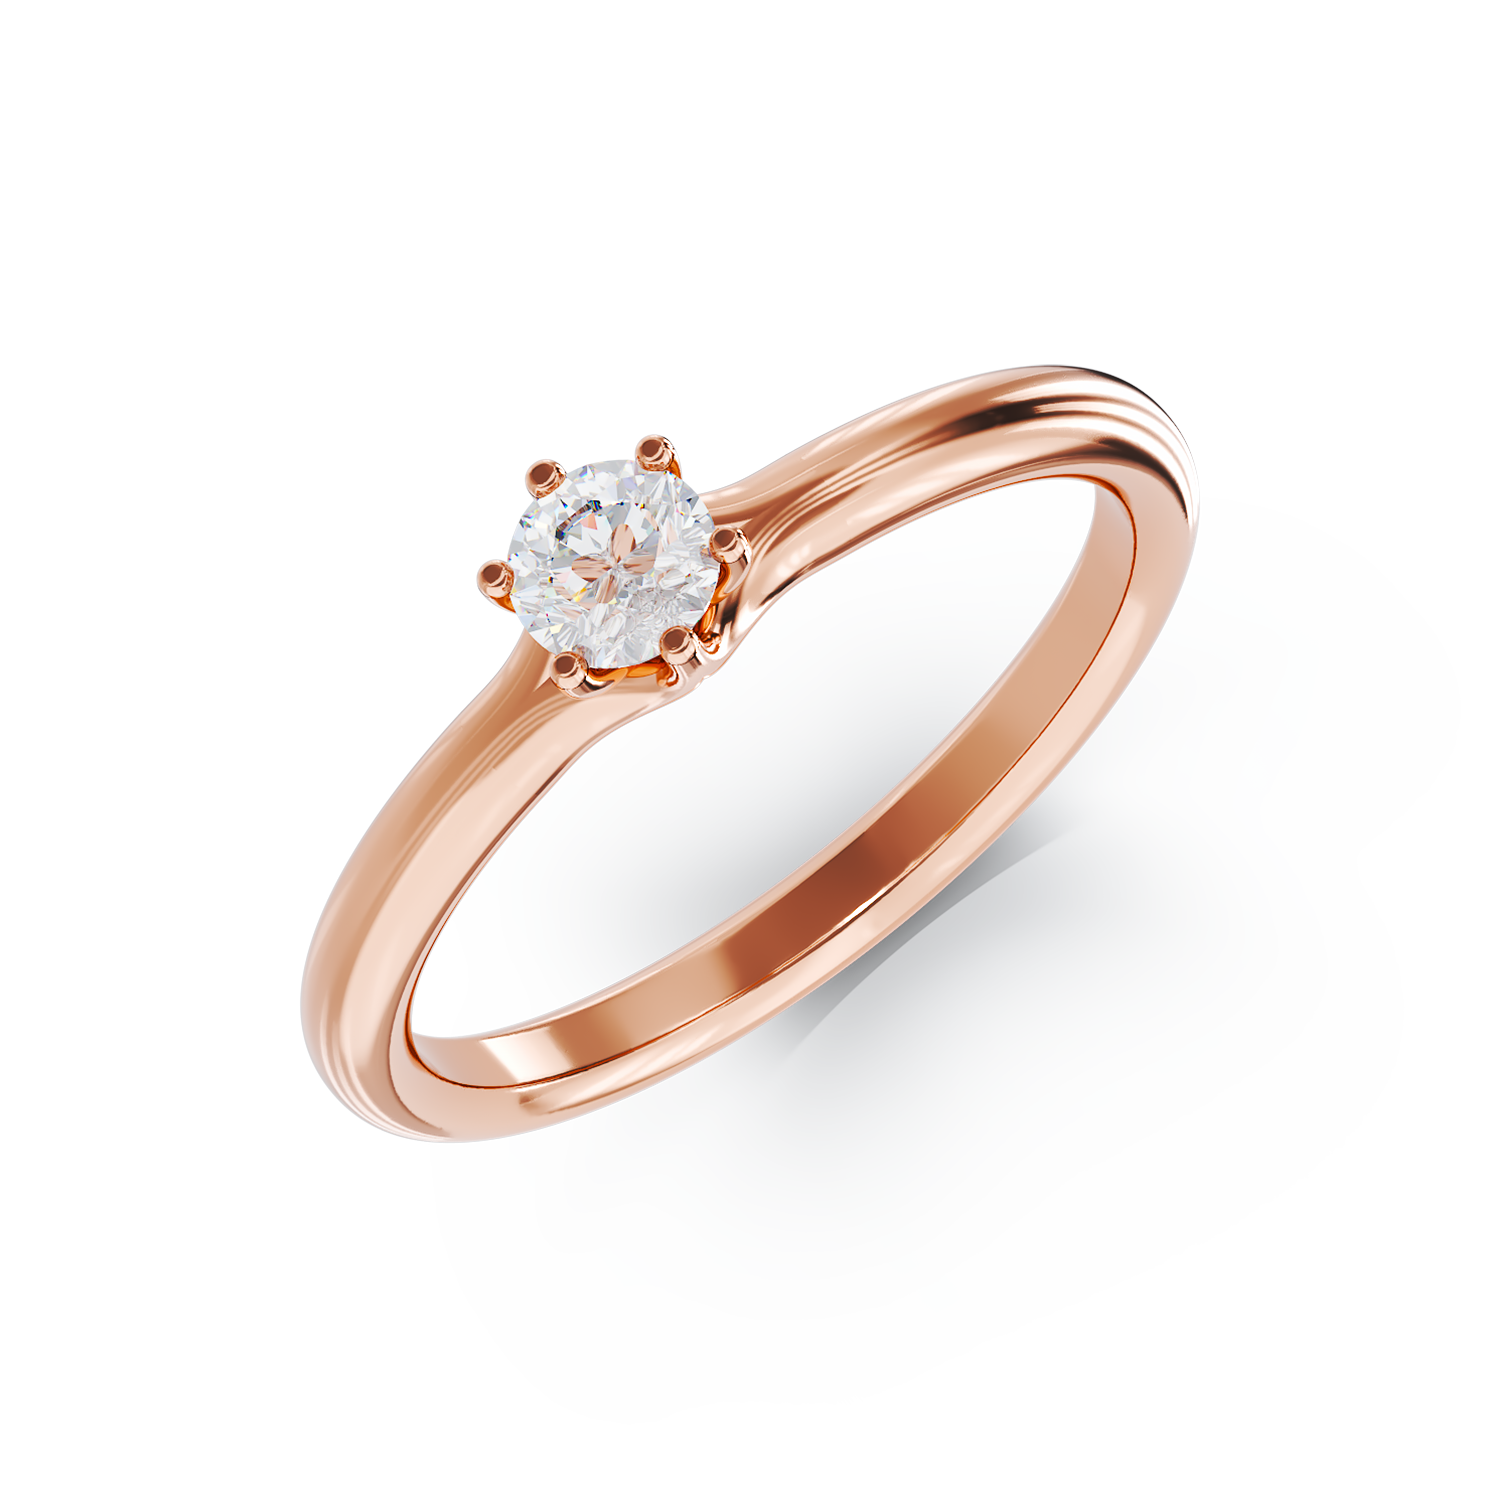 Rose gold engagement ring with 0.24ct solitaire diamond